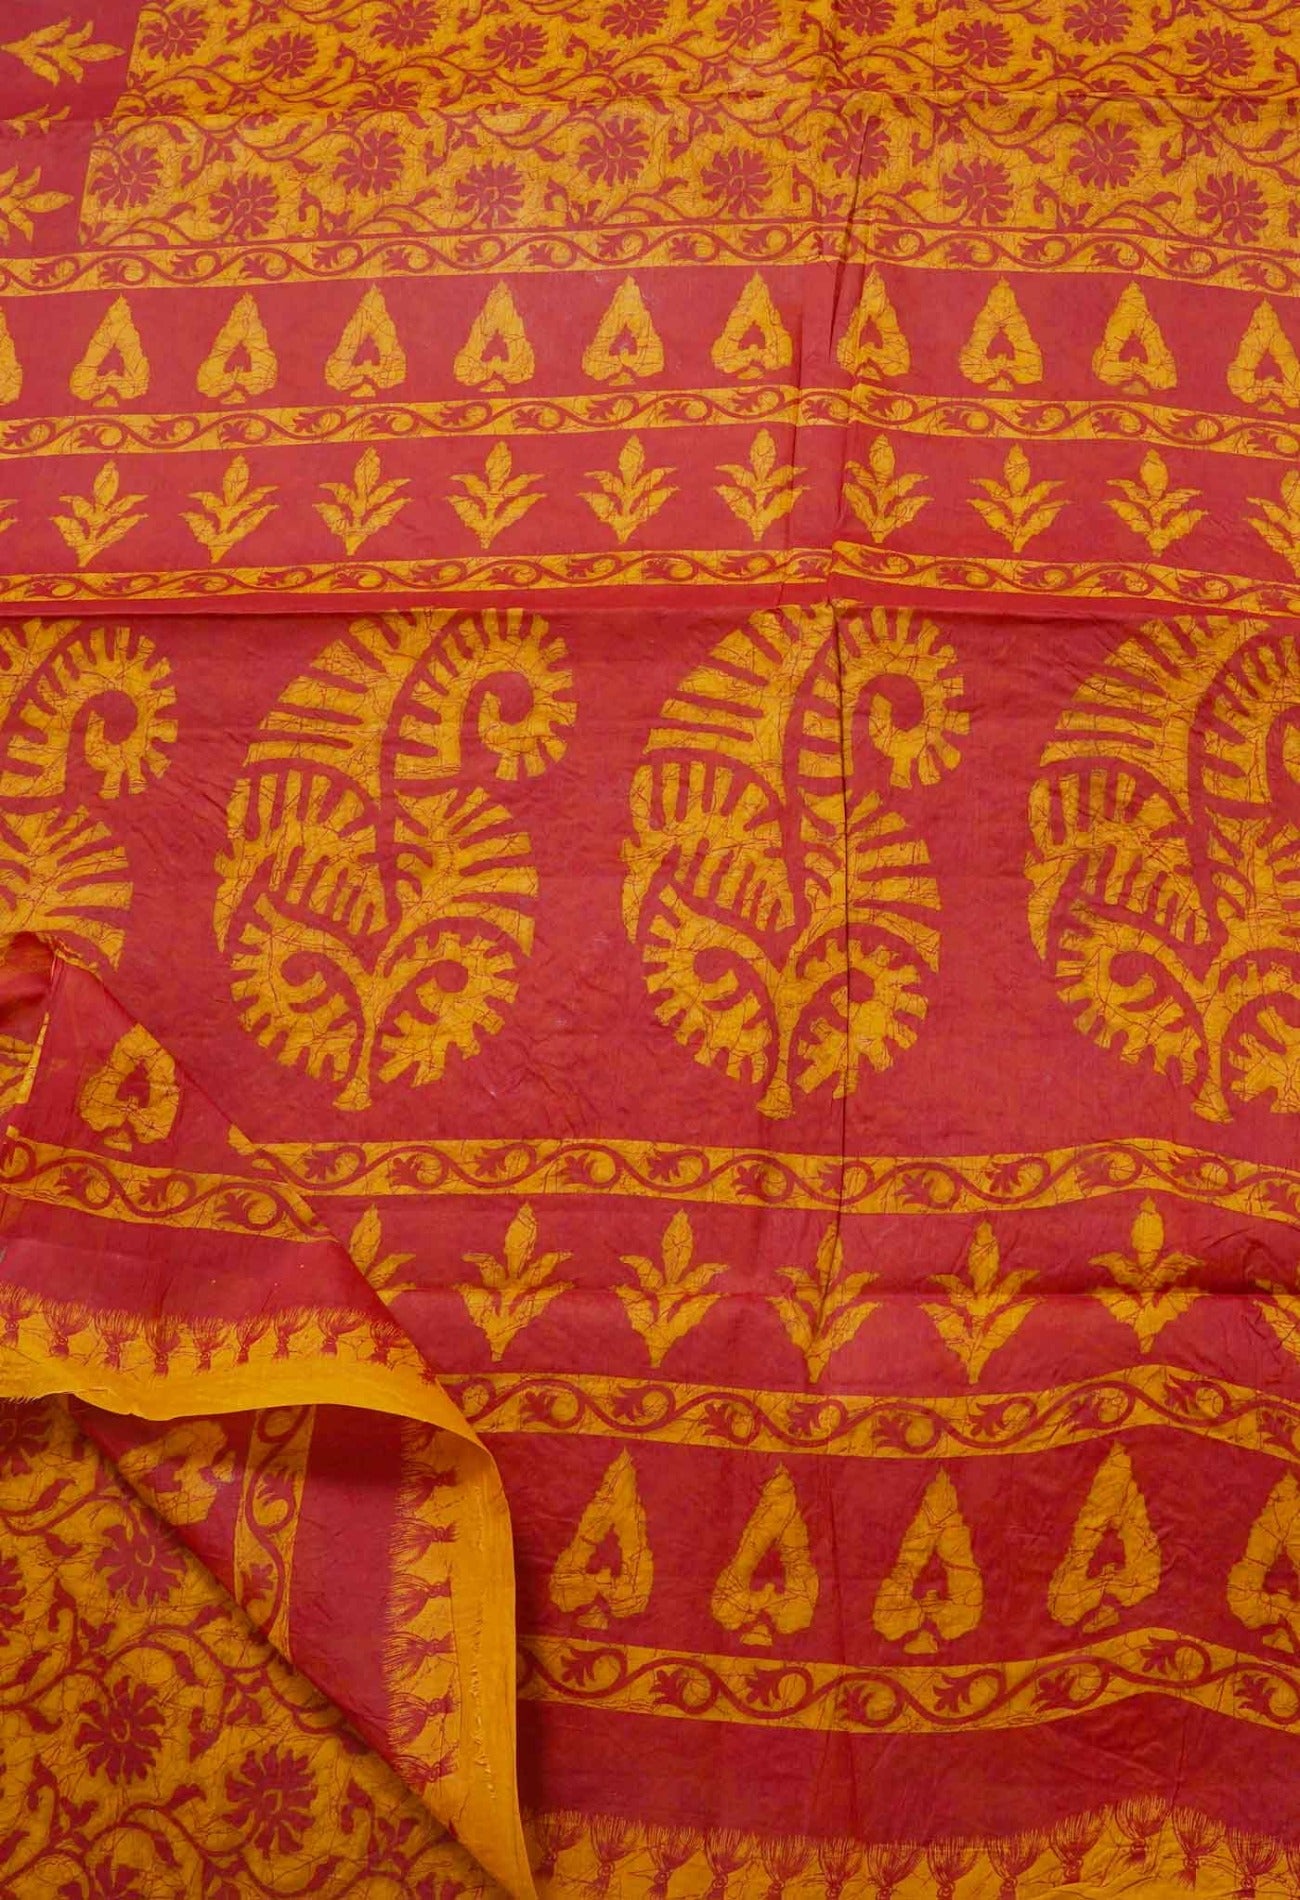 Online Shopping for Orange-Red Pure Krisha Block Printed  Cotton Saree with Hand Block Prints from Rajasthan at Unnatisilks.com India
